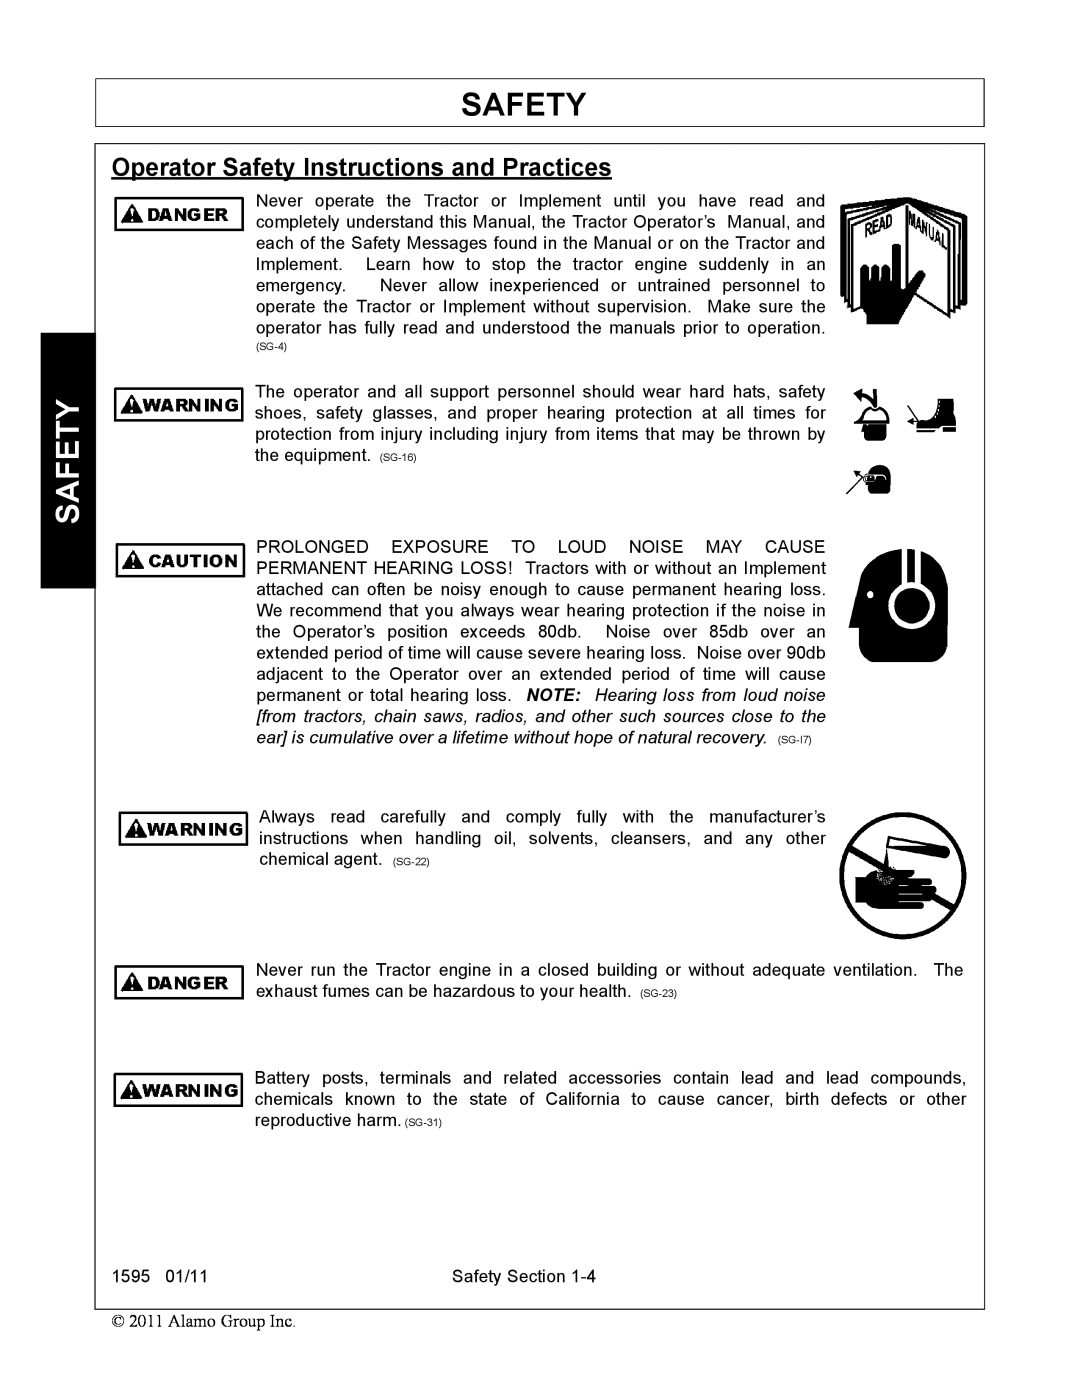 Alamo 1595 manual Operator Safety Instructions and Practices, SG-4 